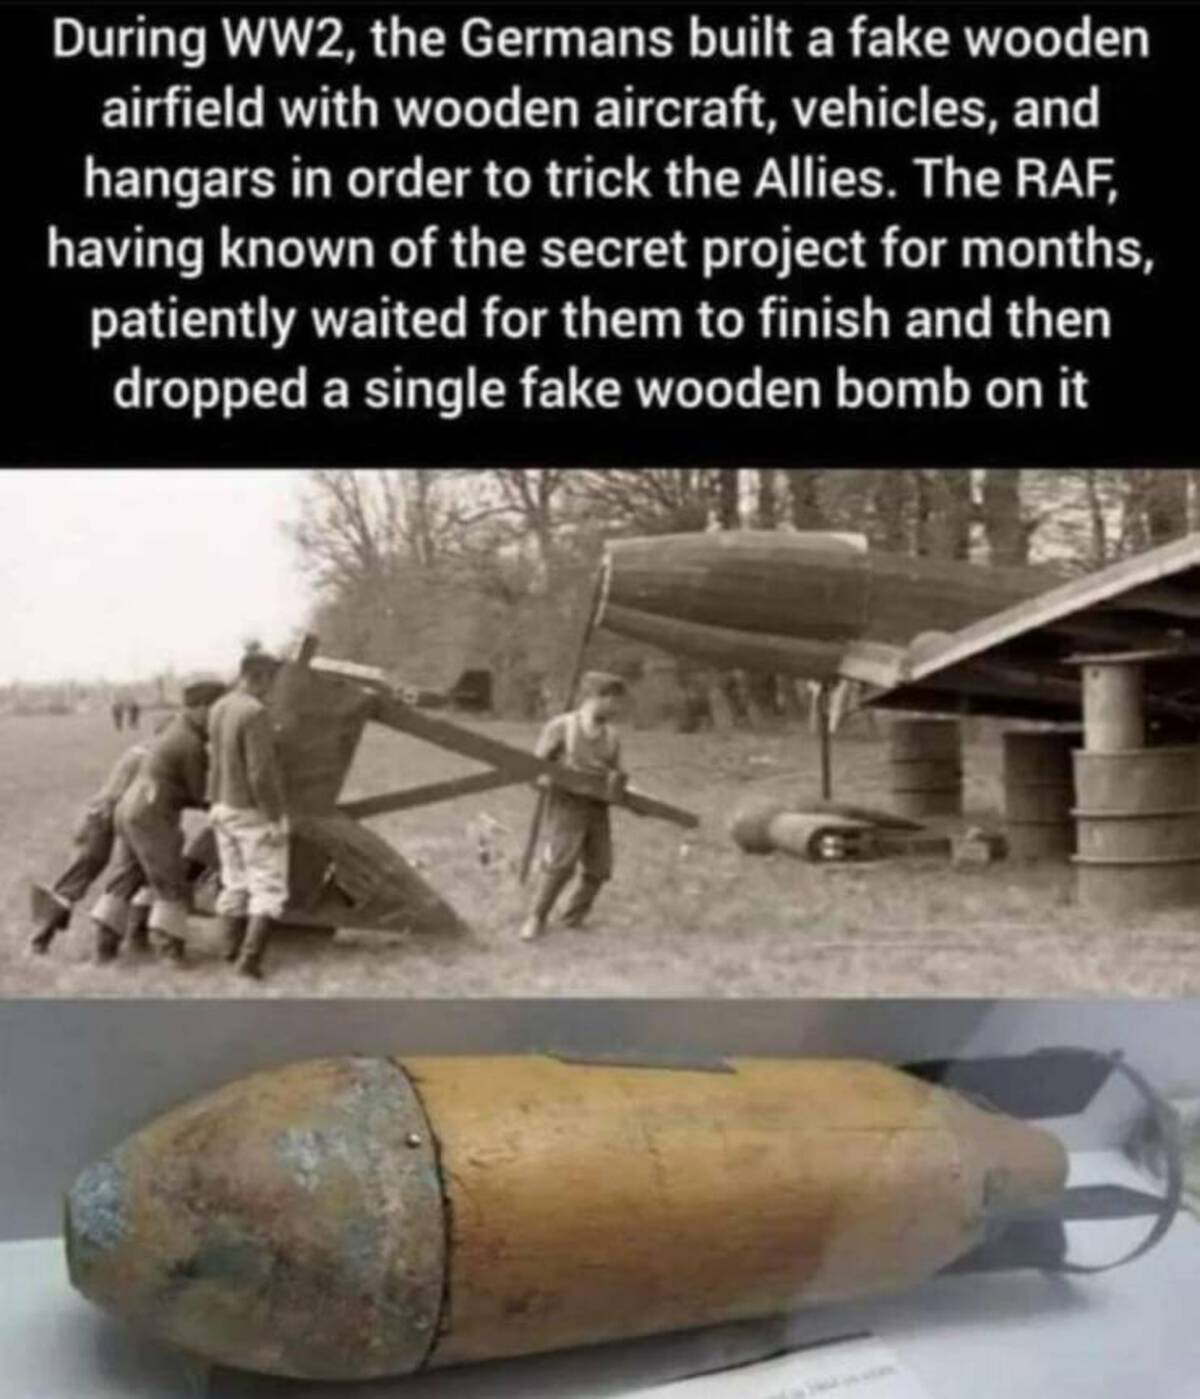 wooden bomb - During WW2, the Germans built a fake wooden airfield with wooden aircraft, vehicles, and hangars in order to trick the Allies. The Raf, having known of the secret project for months, patiently waited for them to finish and then dropped a sin